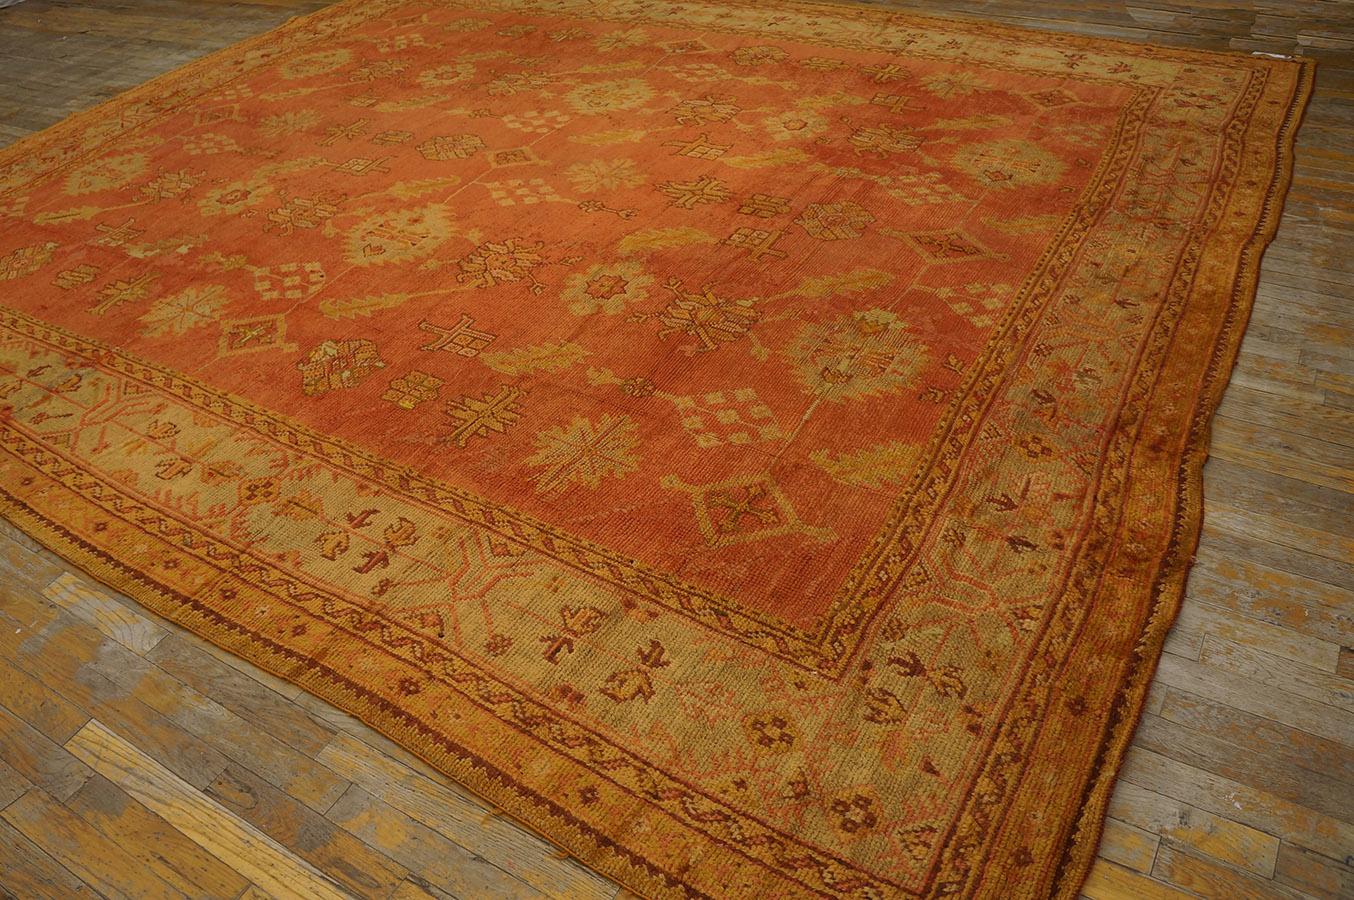 Early 20th Century Turkish Oushak Carpet ( 10'5'' x 12'6'' - 318 x 382 ) In Good Condition For Sale In New York, NY